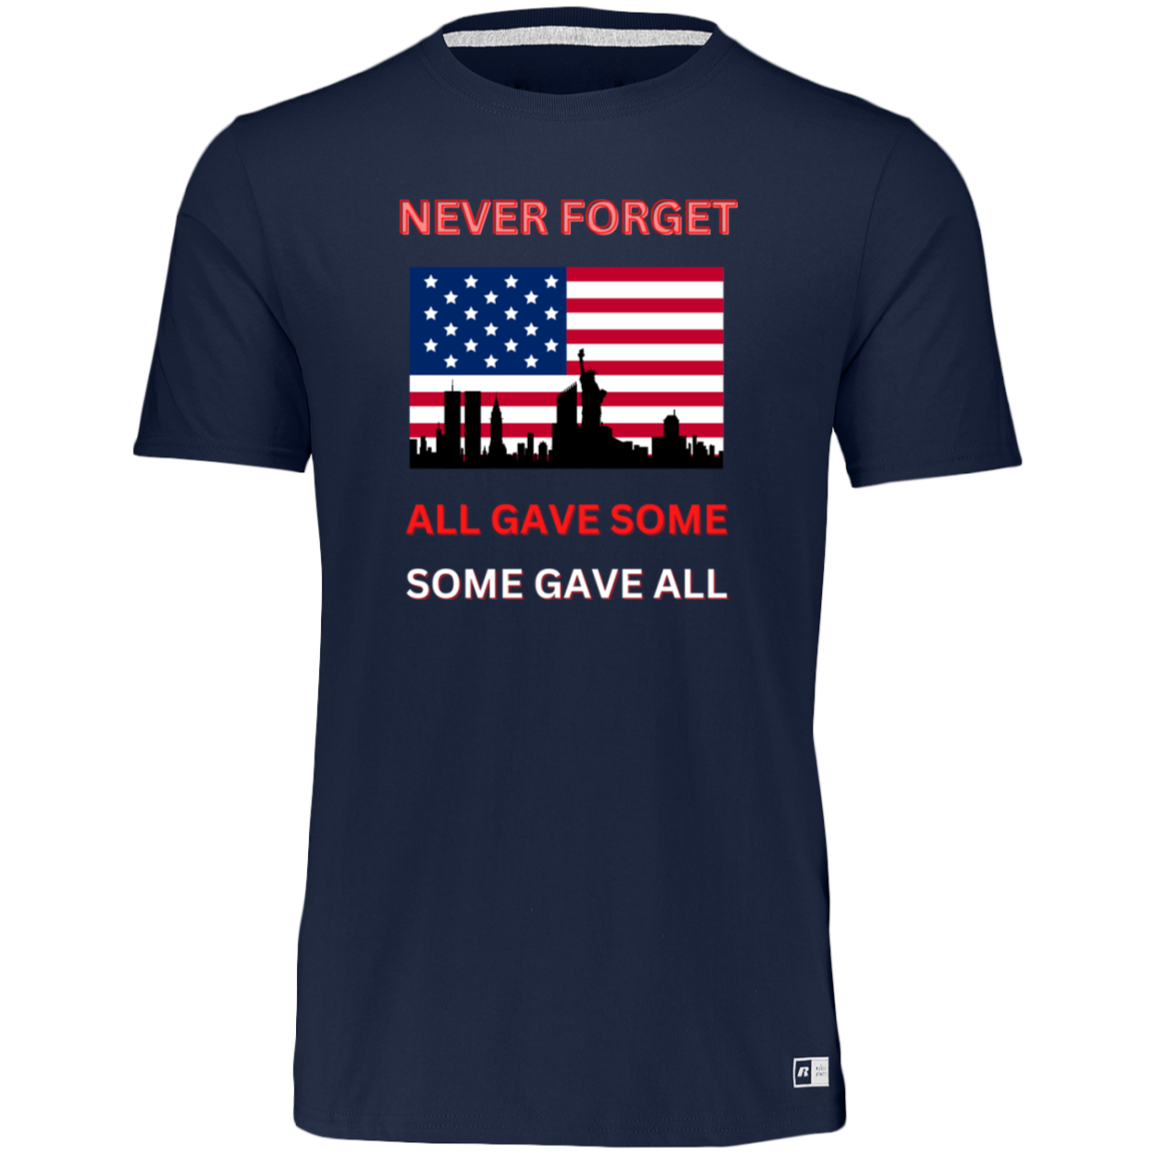 Unisex Dri-Power Tee--Never Forget All Gave Some